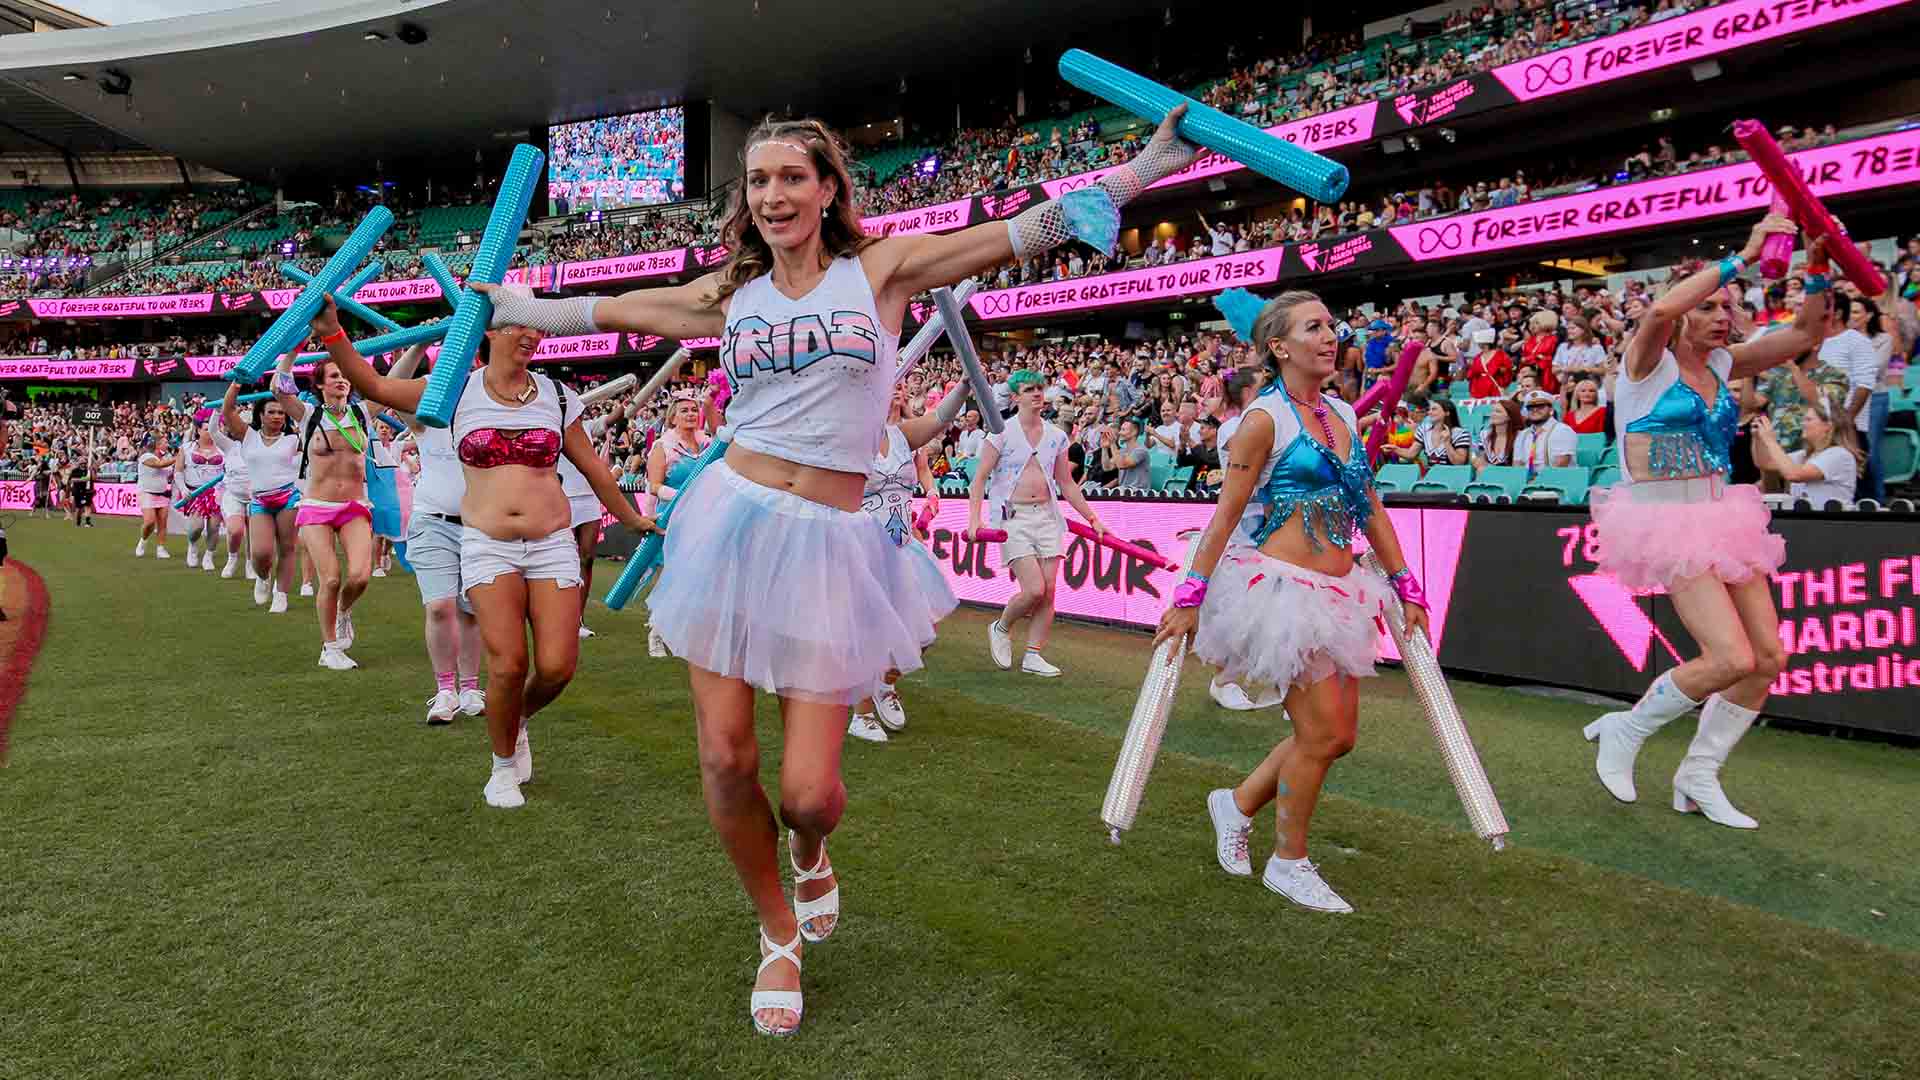 The Sydney Gay and Lesbian Mardi Gras Parade Will Be Held at the SCG Again in 2022